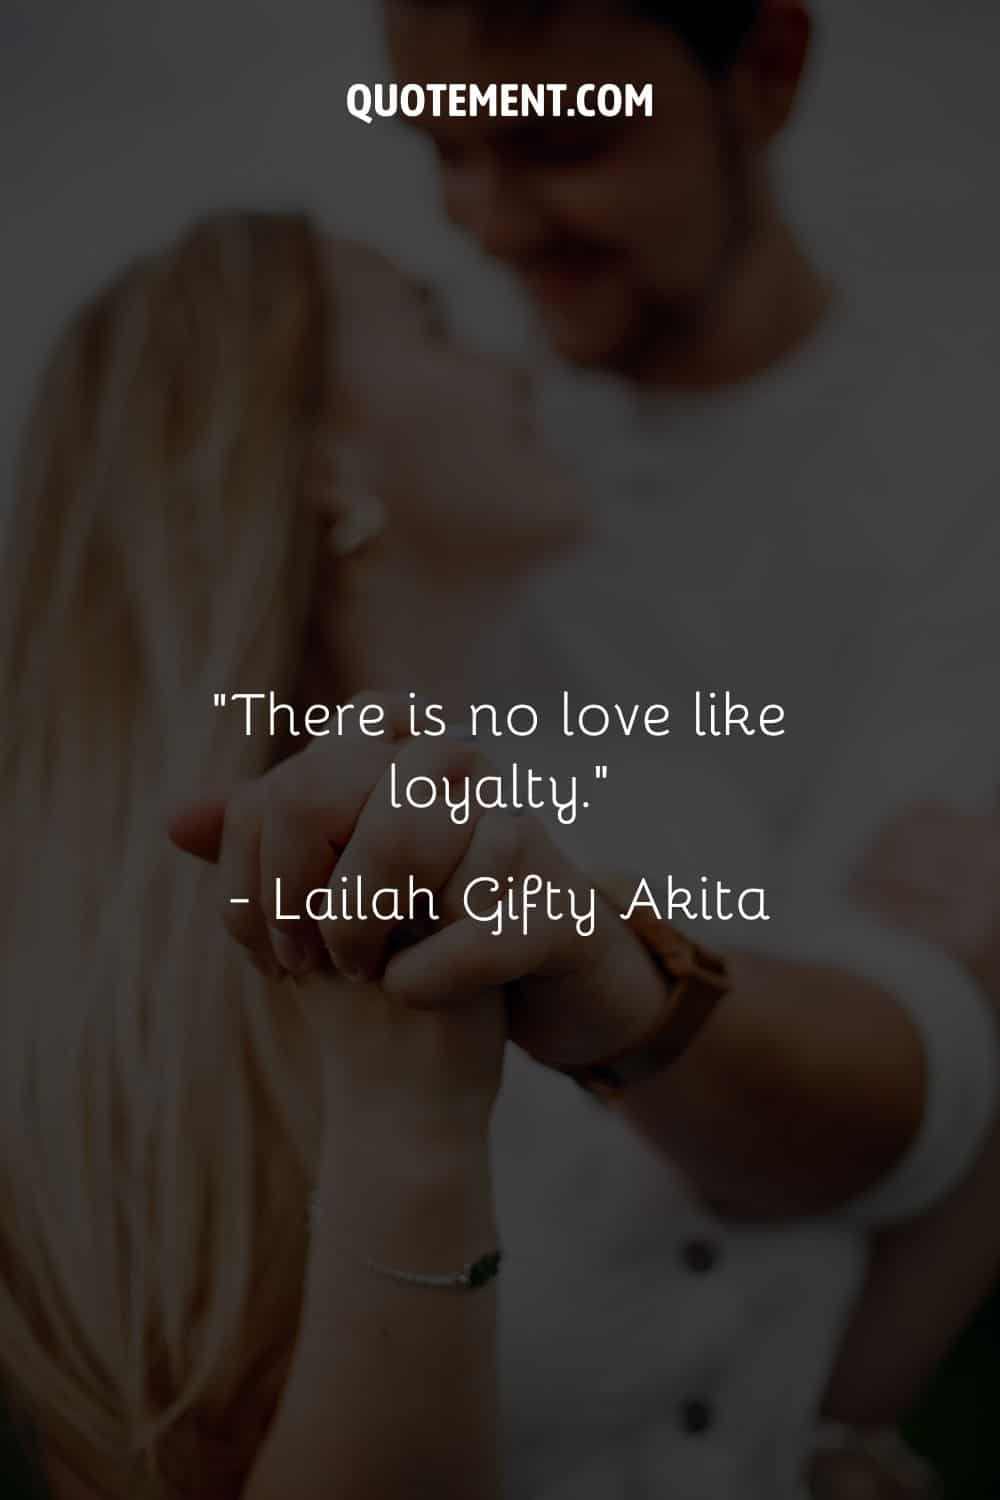 “There is no love like loyalty.” ― Lailah Gifty Akita